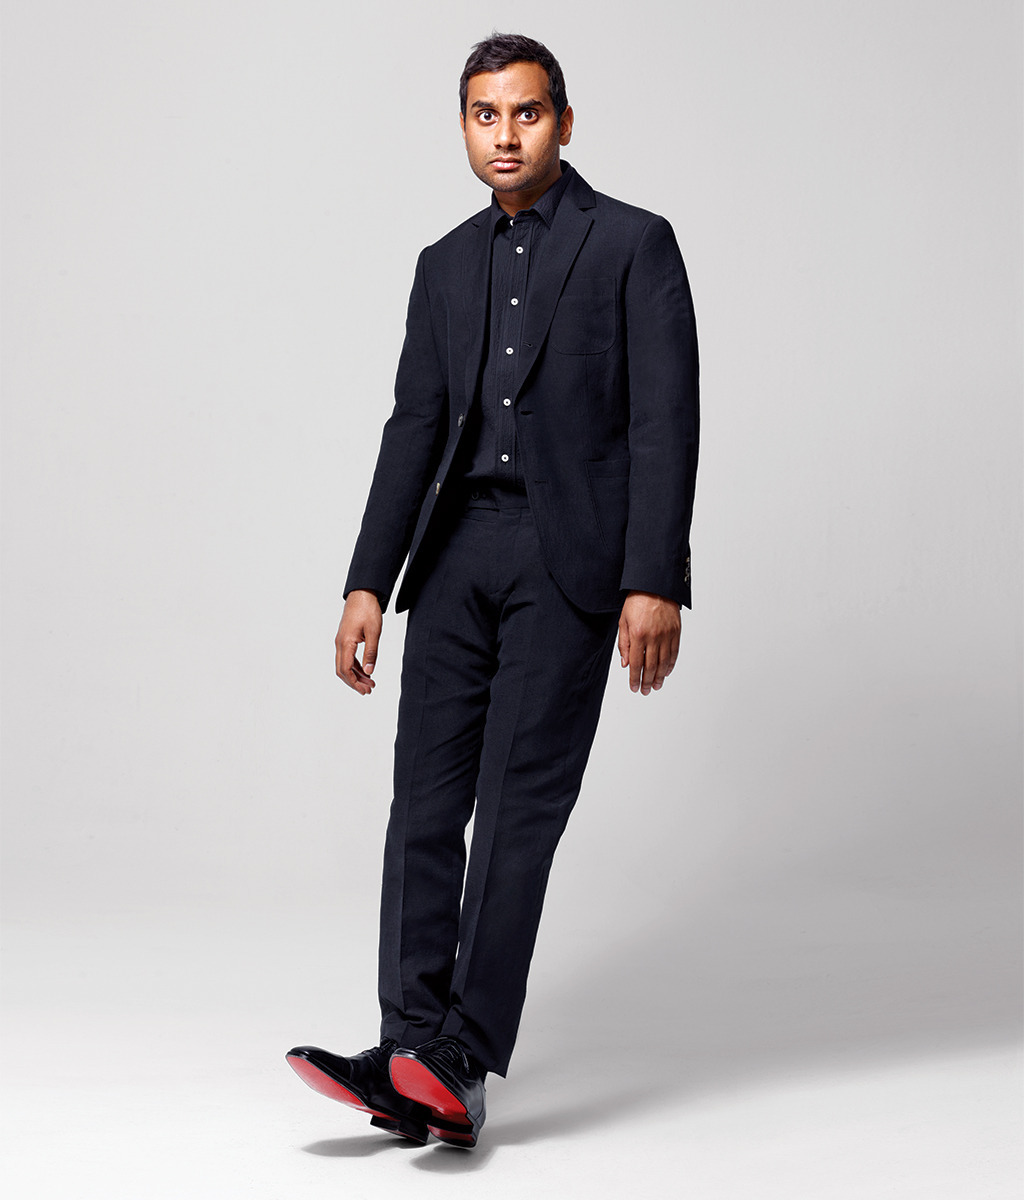 Image of Aziz Ansari wearing a Brooklyn Tailors suit and shirt for a New York Magazine article